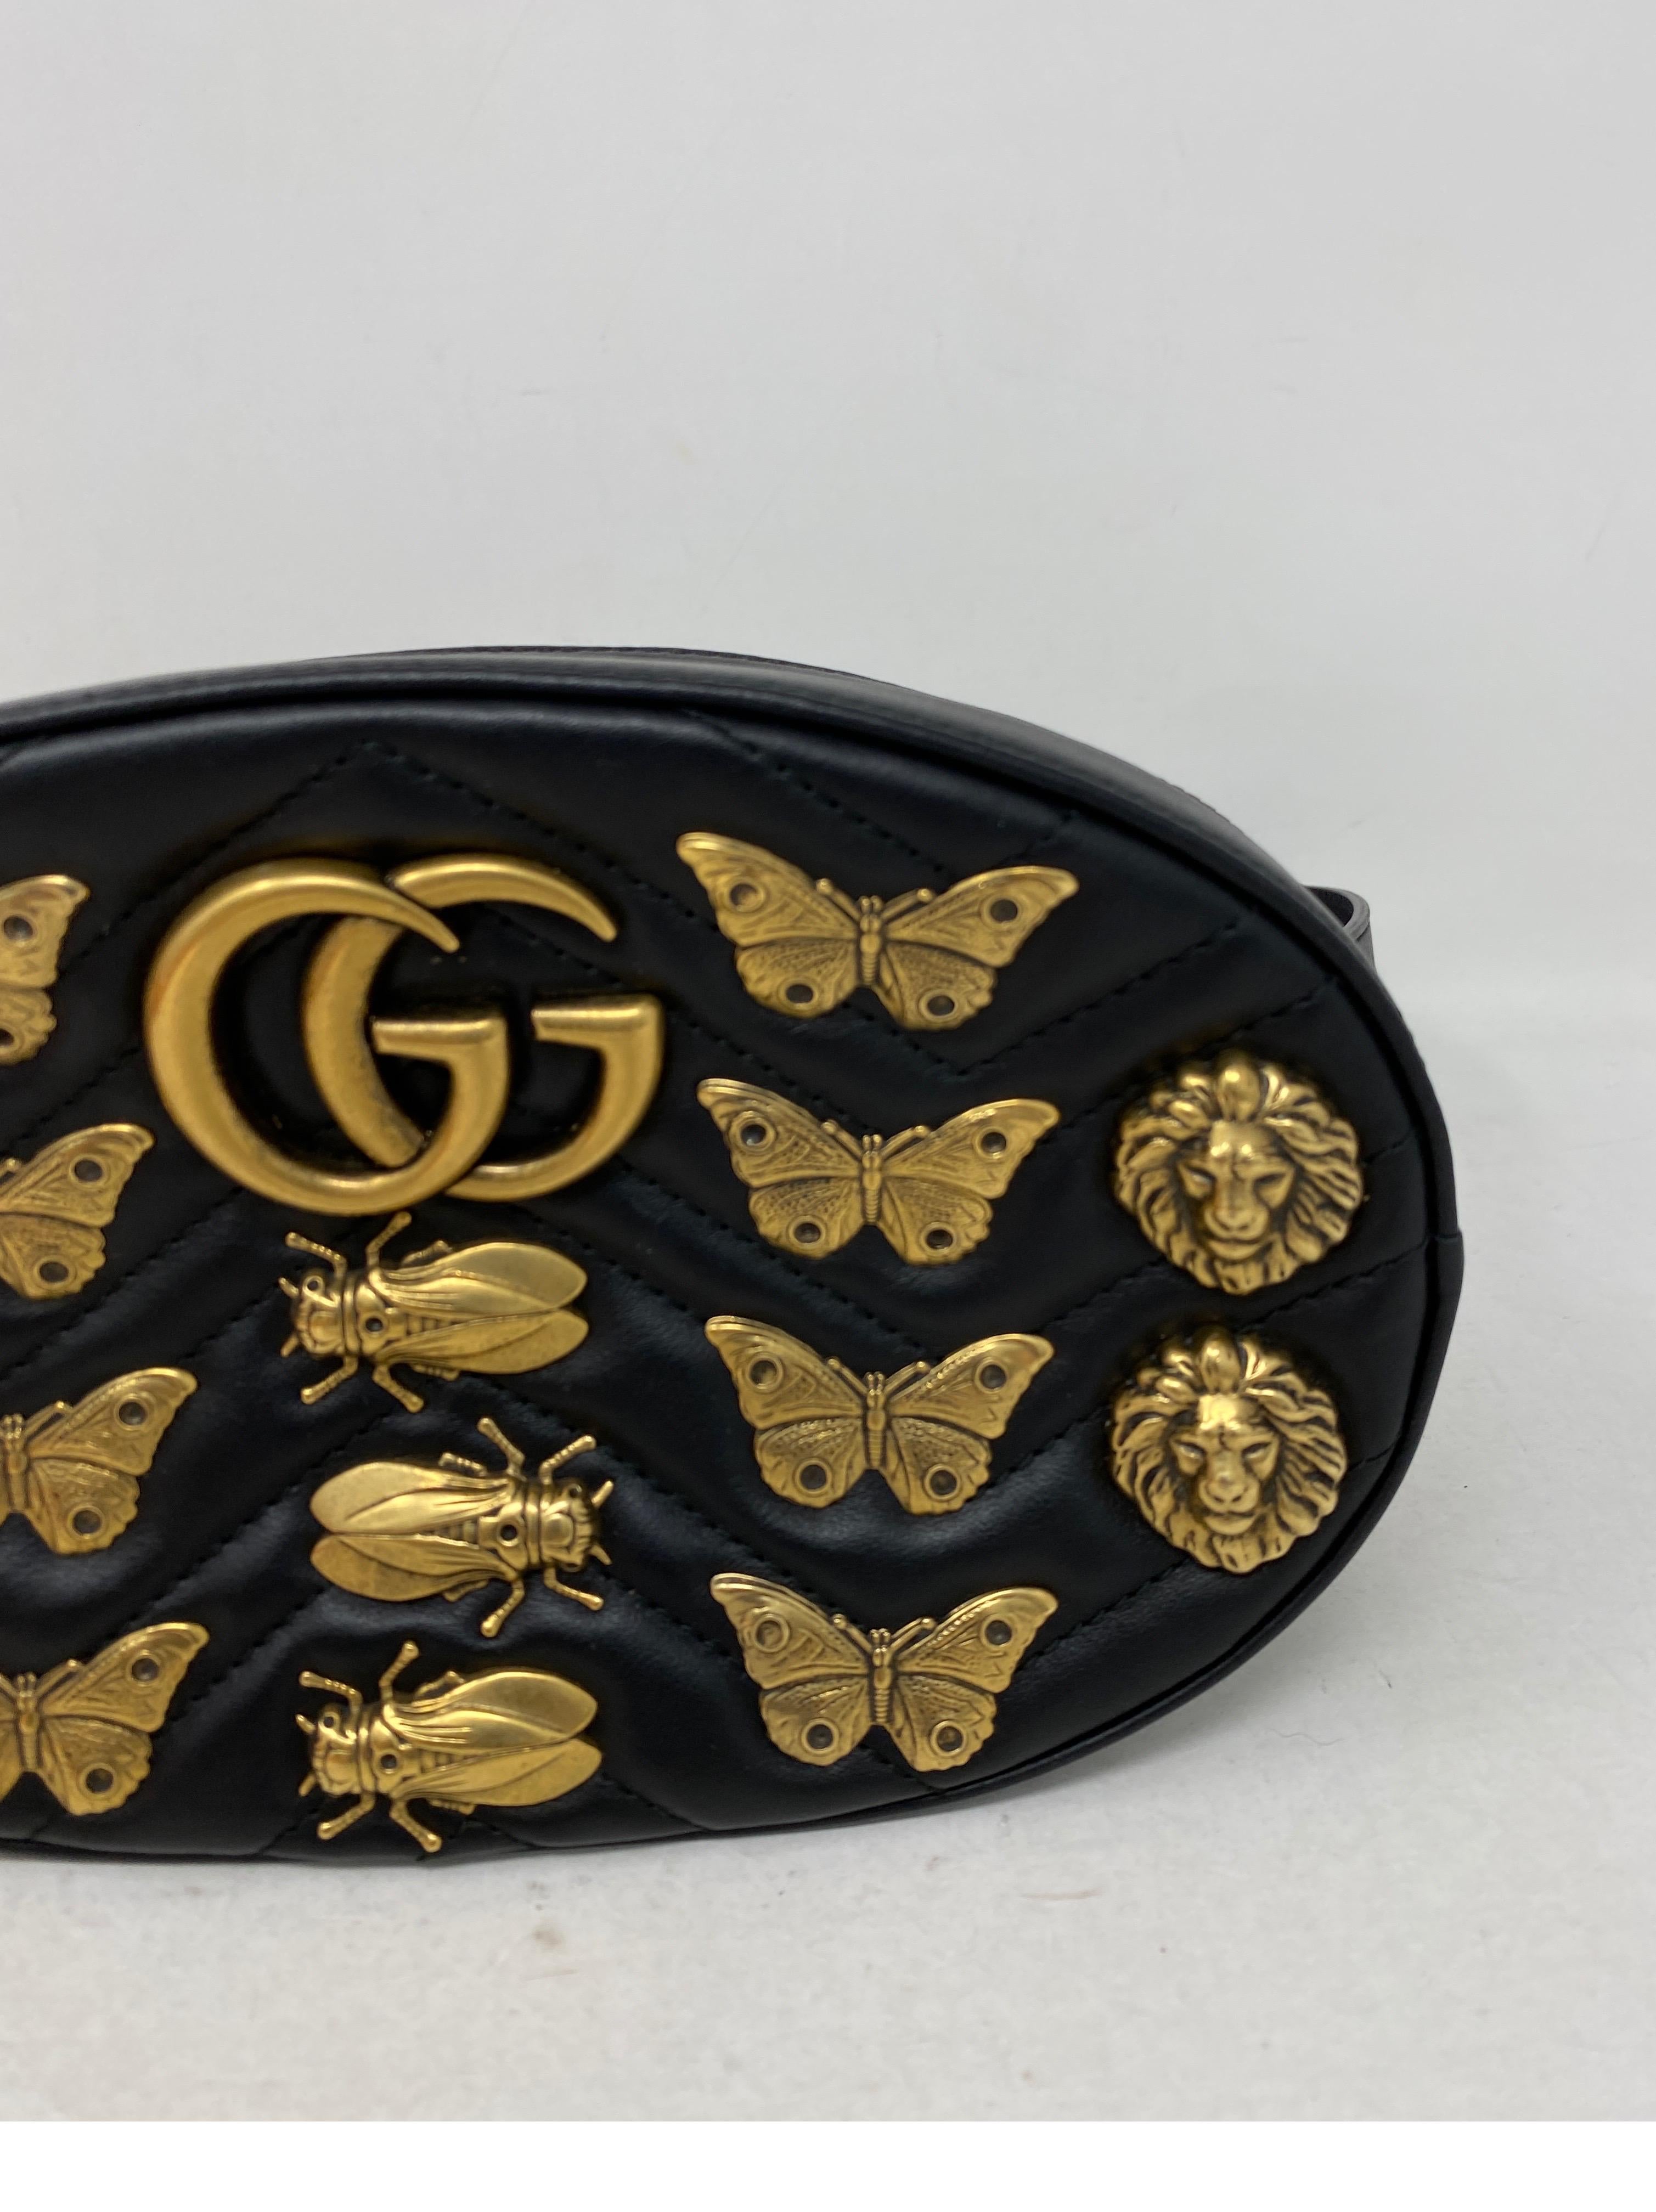 Gucci Insects Bum Bag. Great looking belt bag. Can be worn crossbody too. Excellent condition. Like new. Guaranteed authentic. 